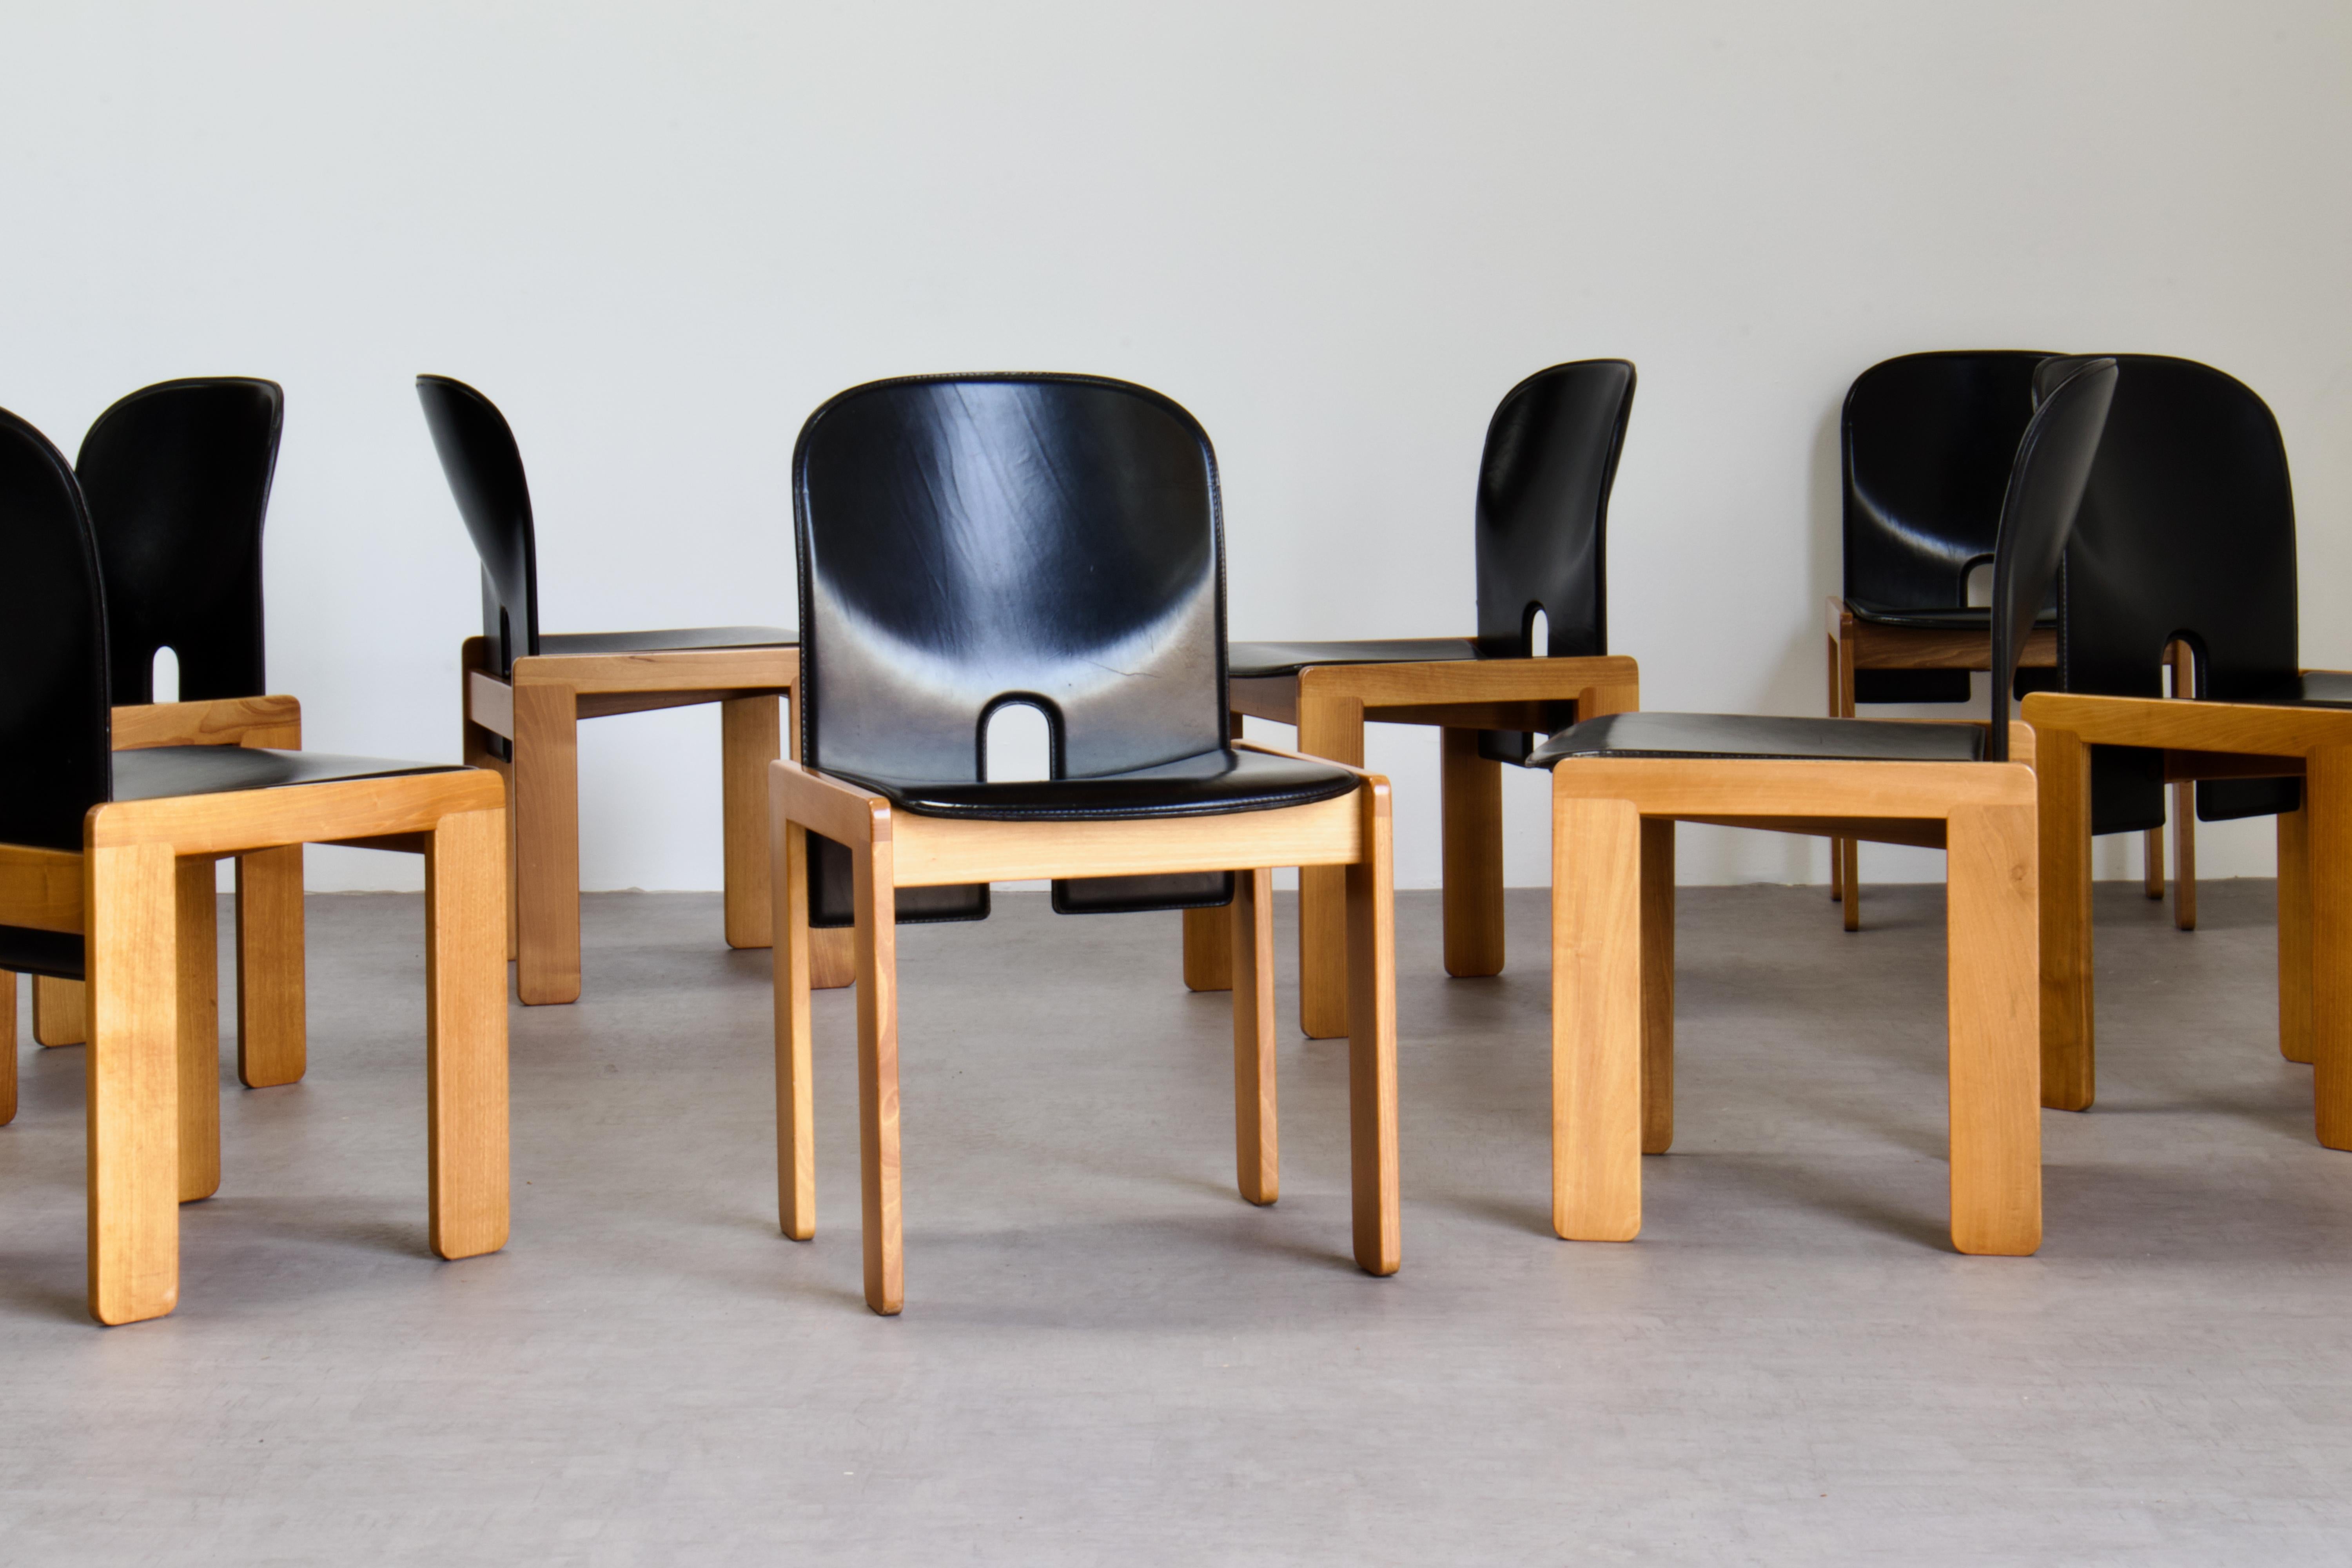 8 Scarpa 121 Chairs in Black Leather & Pale Wood for Cassina Italy, 1960s For Sale 9